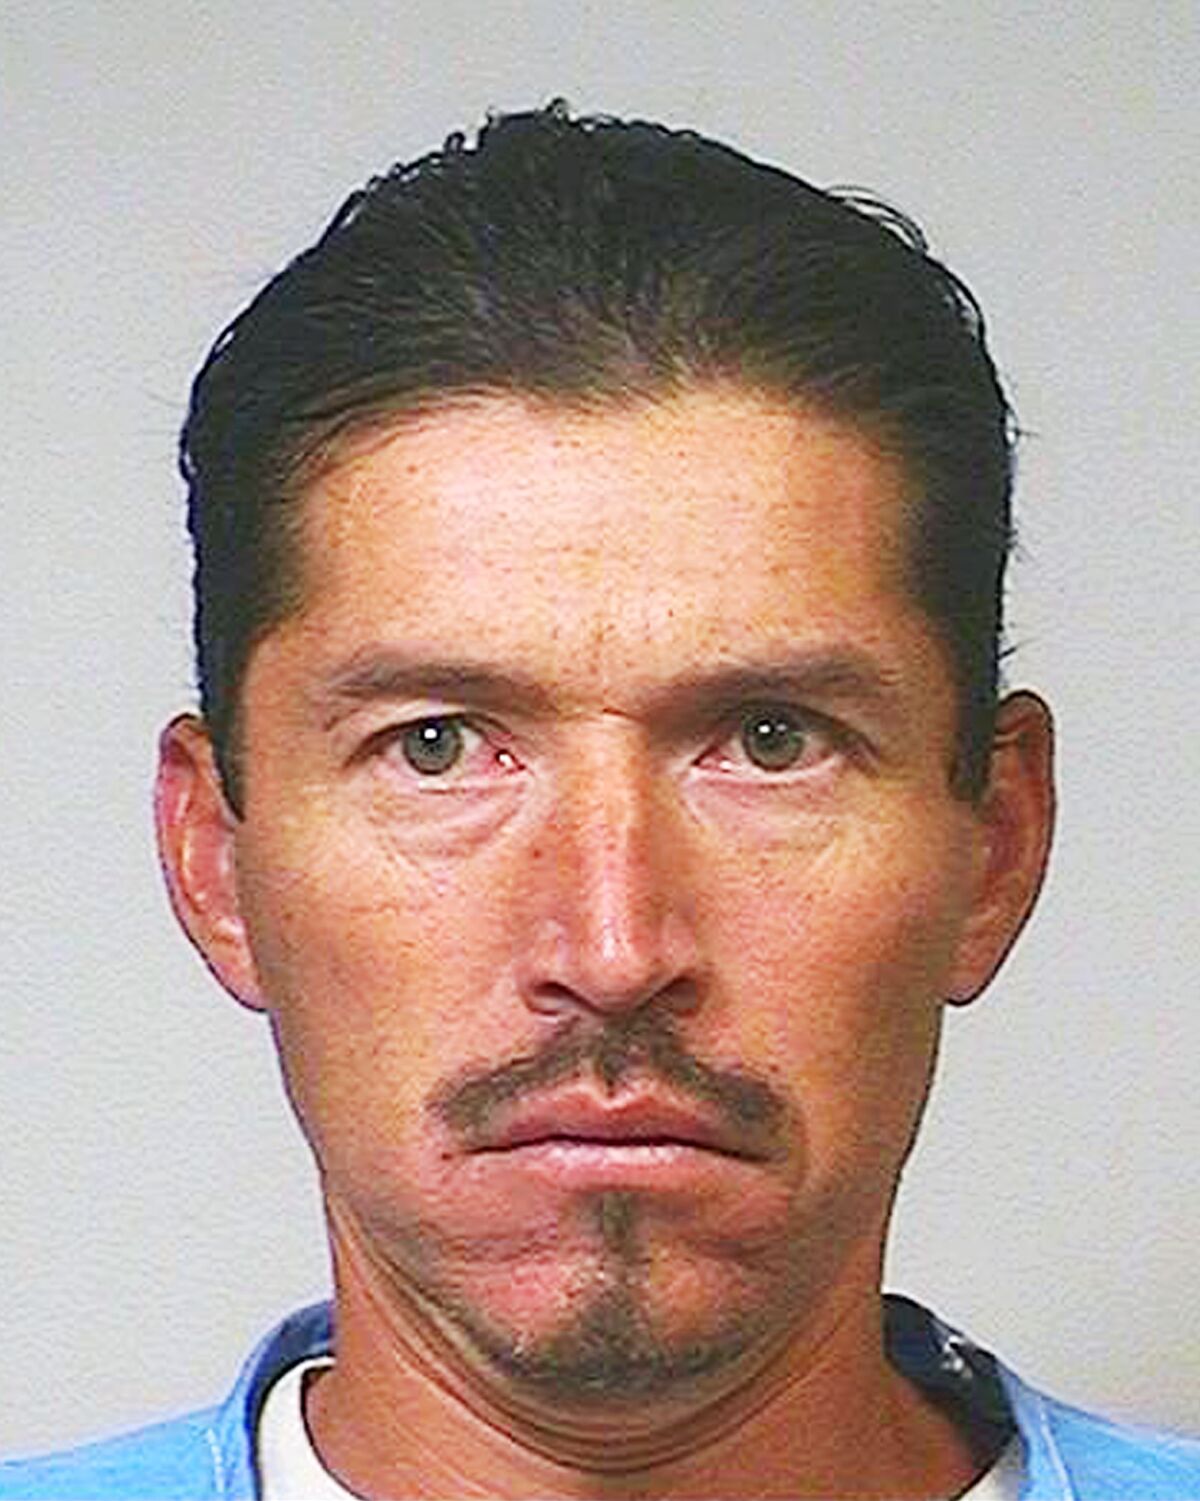 A head and shoulders booking image of a man with slicked-back hair and a goatee facial hair. 